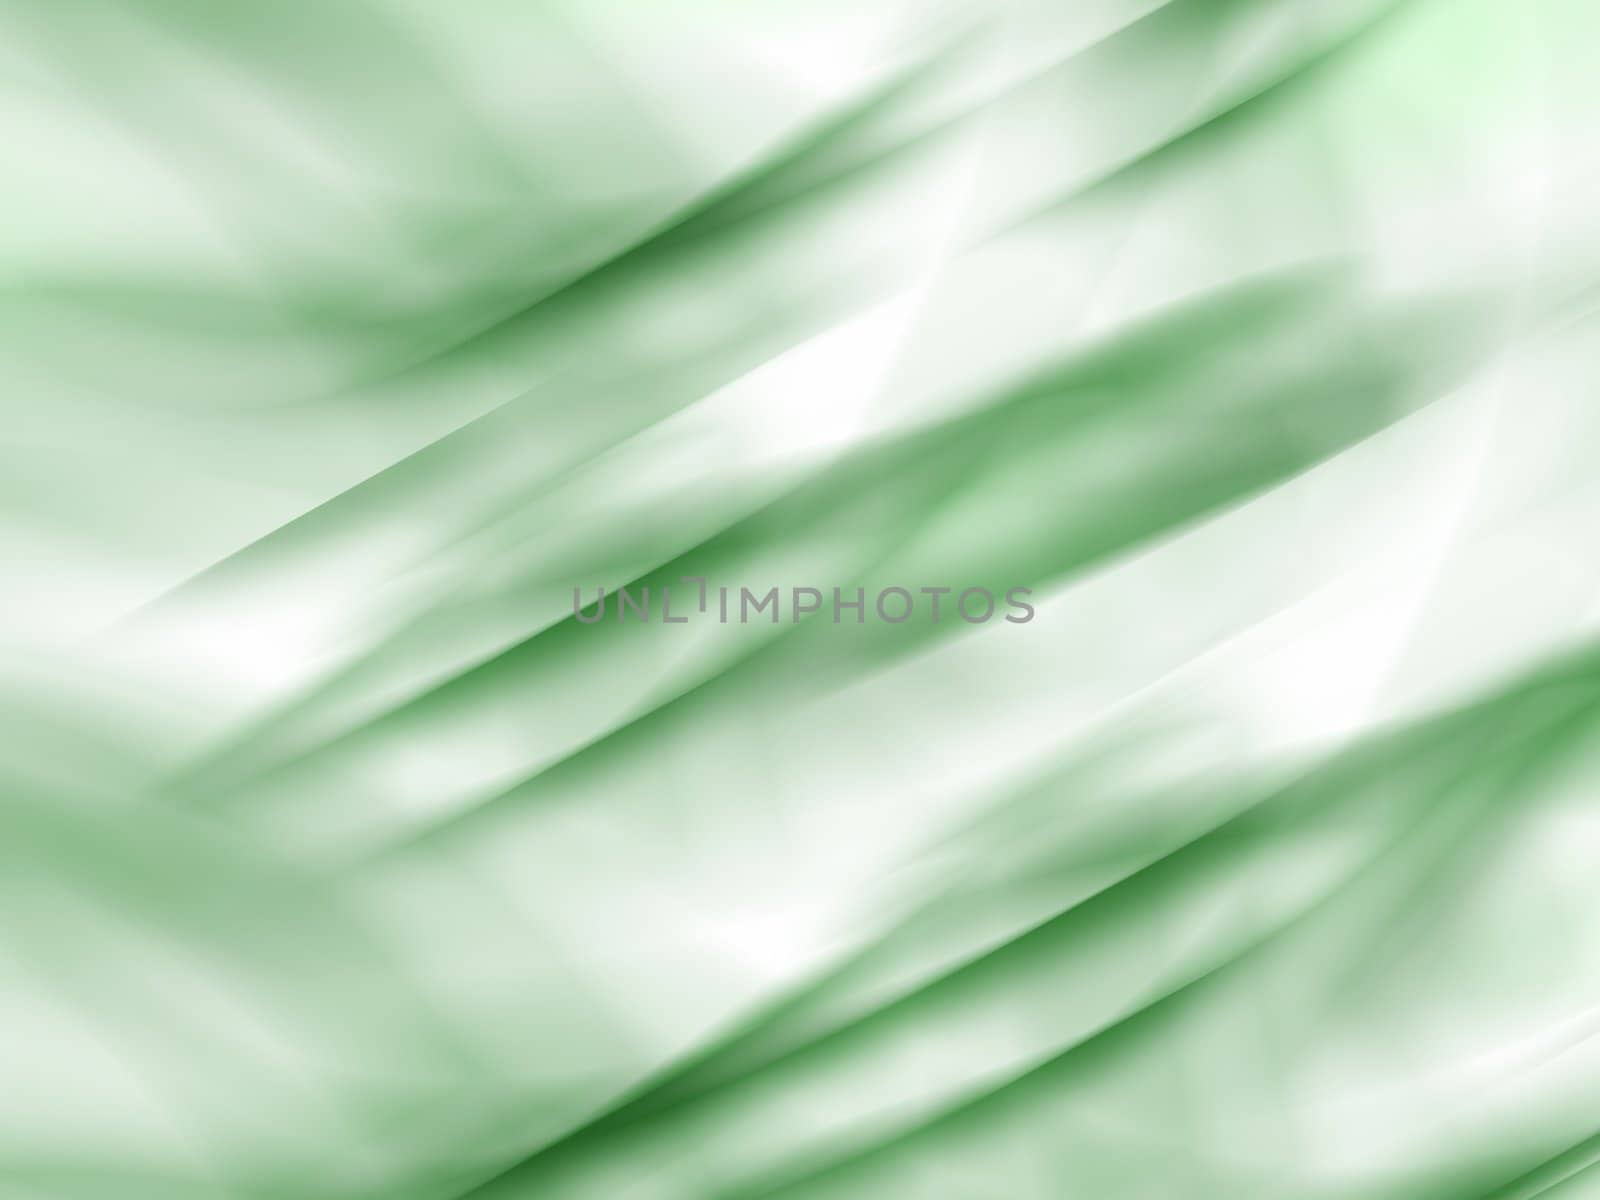 Abstraction in white-green tones